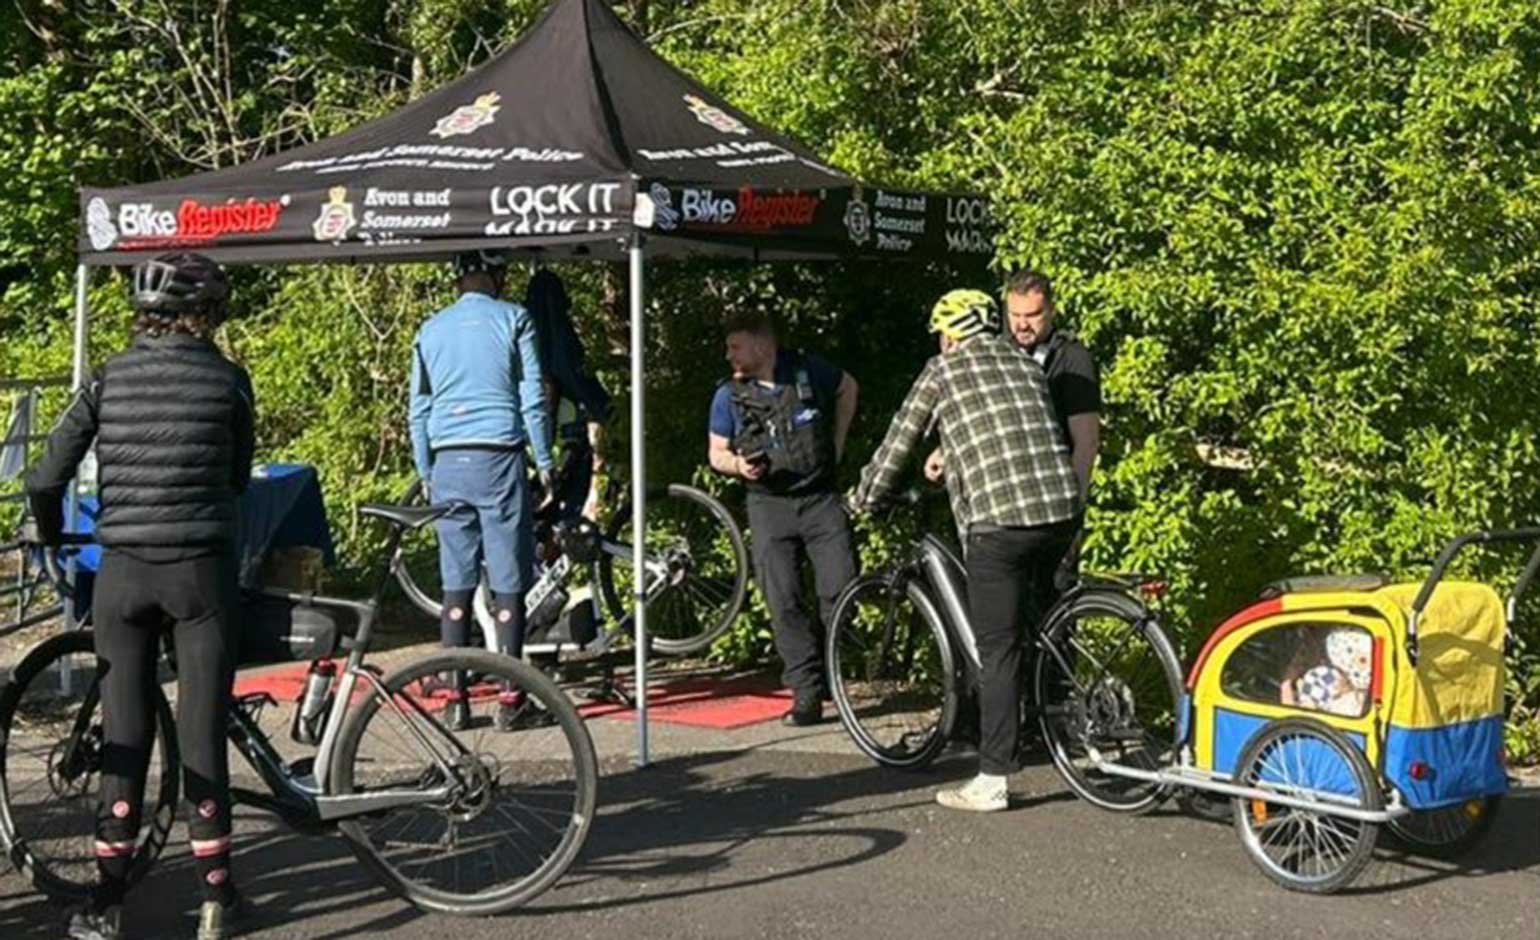 Police cracking down on youths riding stolen bikes into Bath